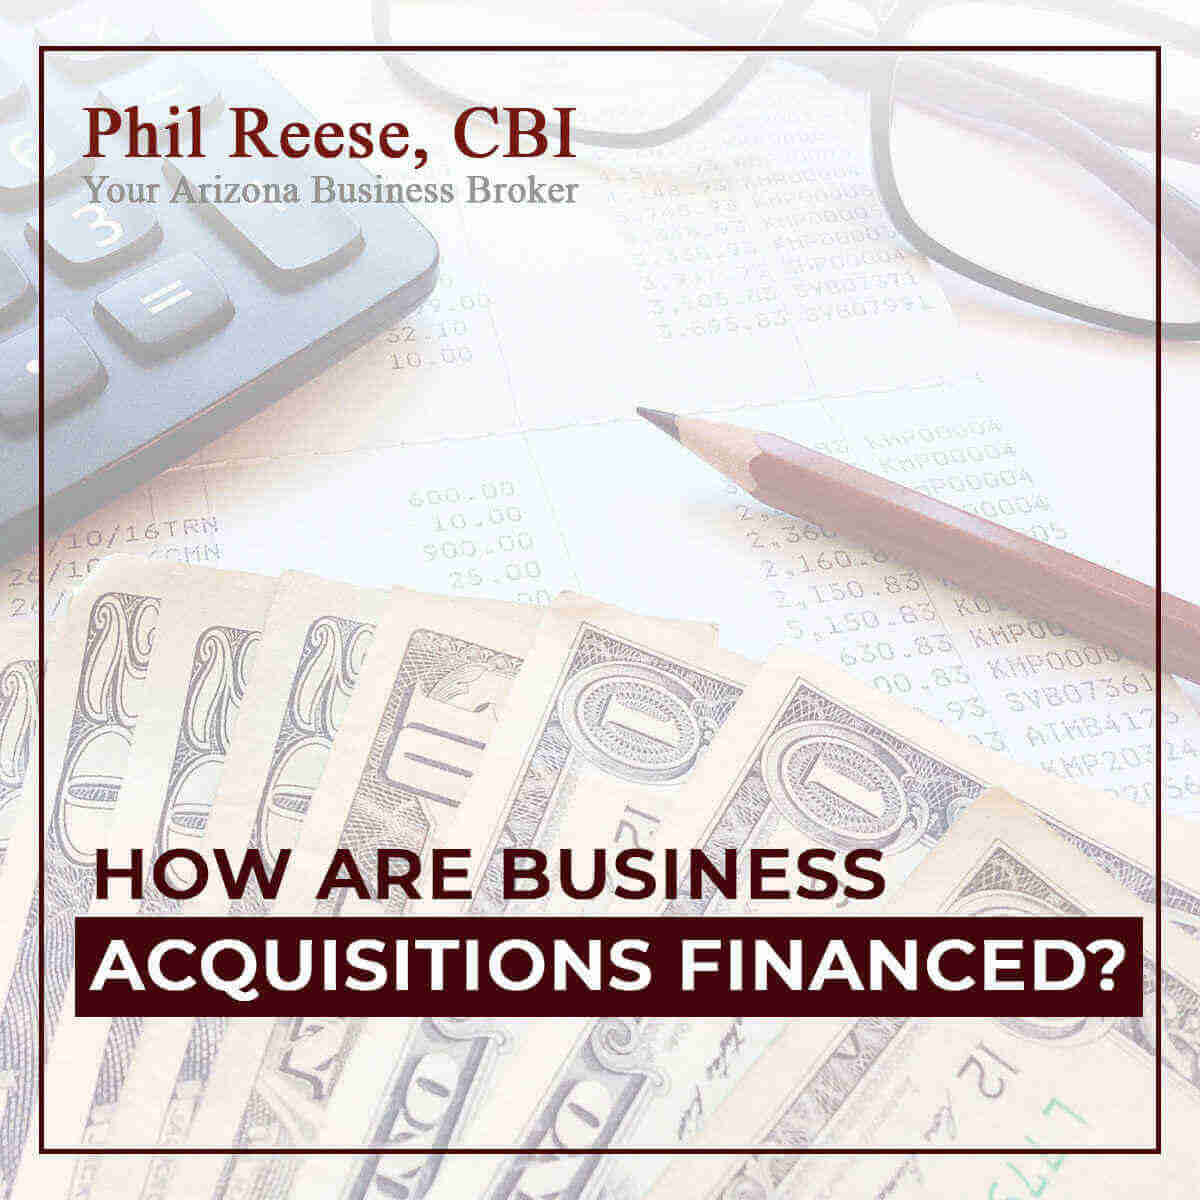 How Are Business Acquisitions Financed?